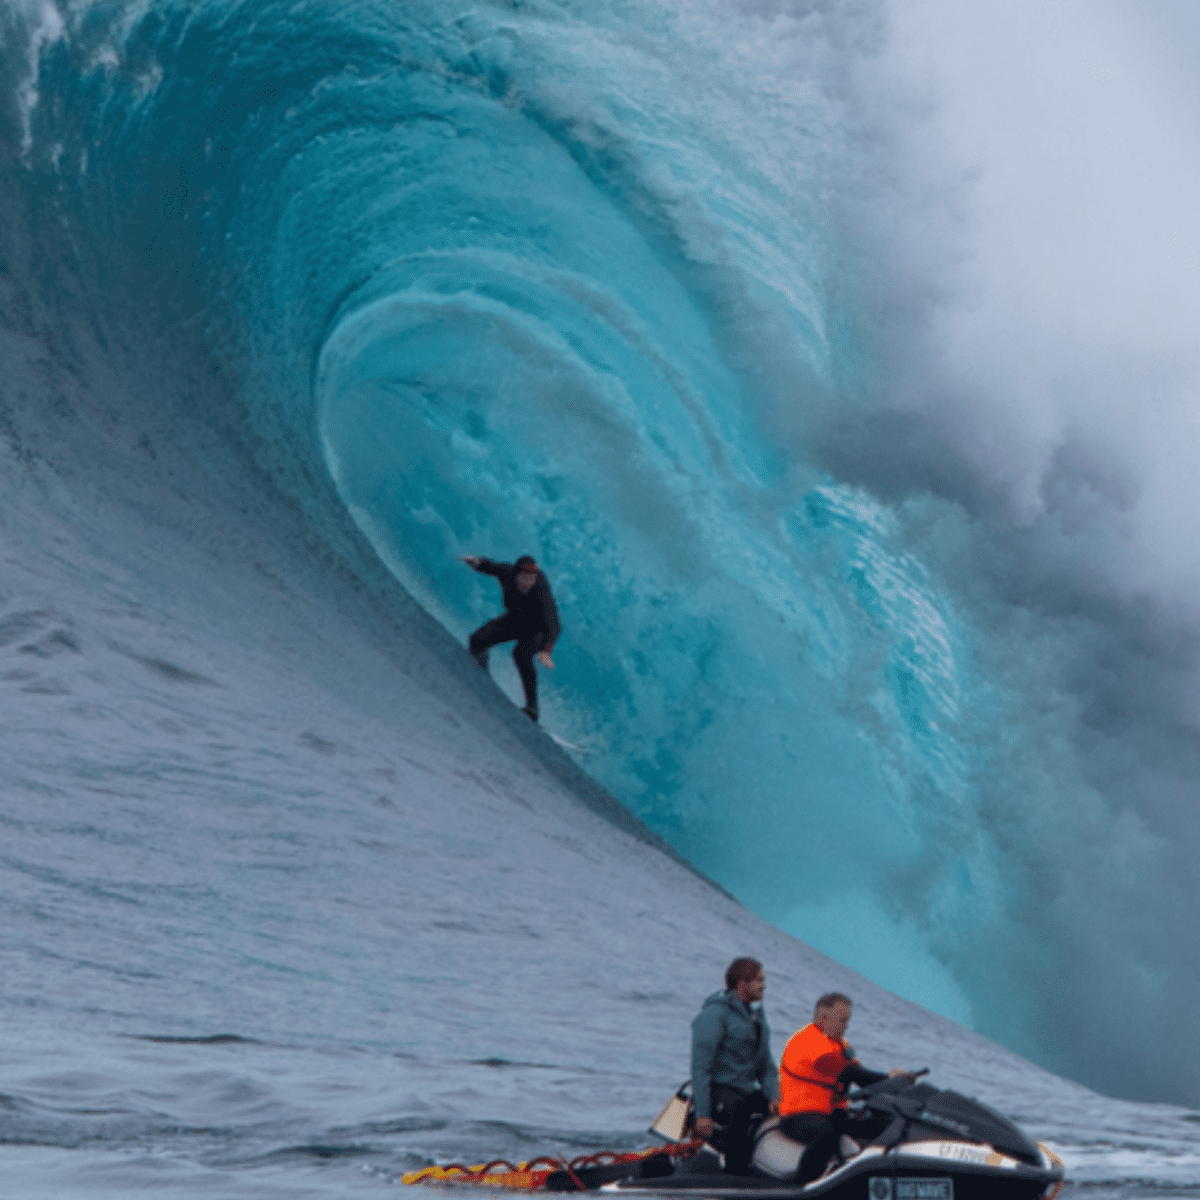 How HBO's '100 Foot Wave' Captured Big-Wave Surfing – The Hollywood Reporter